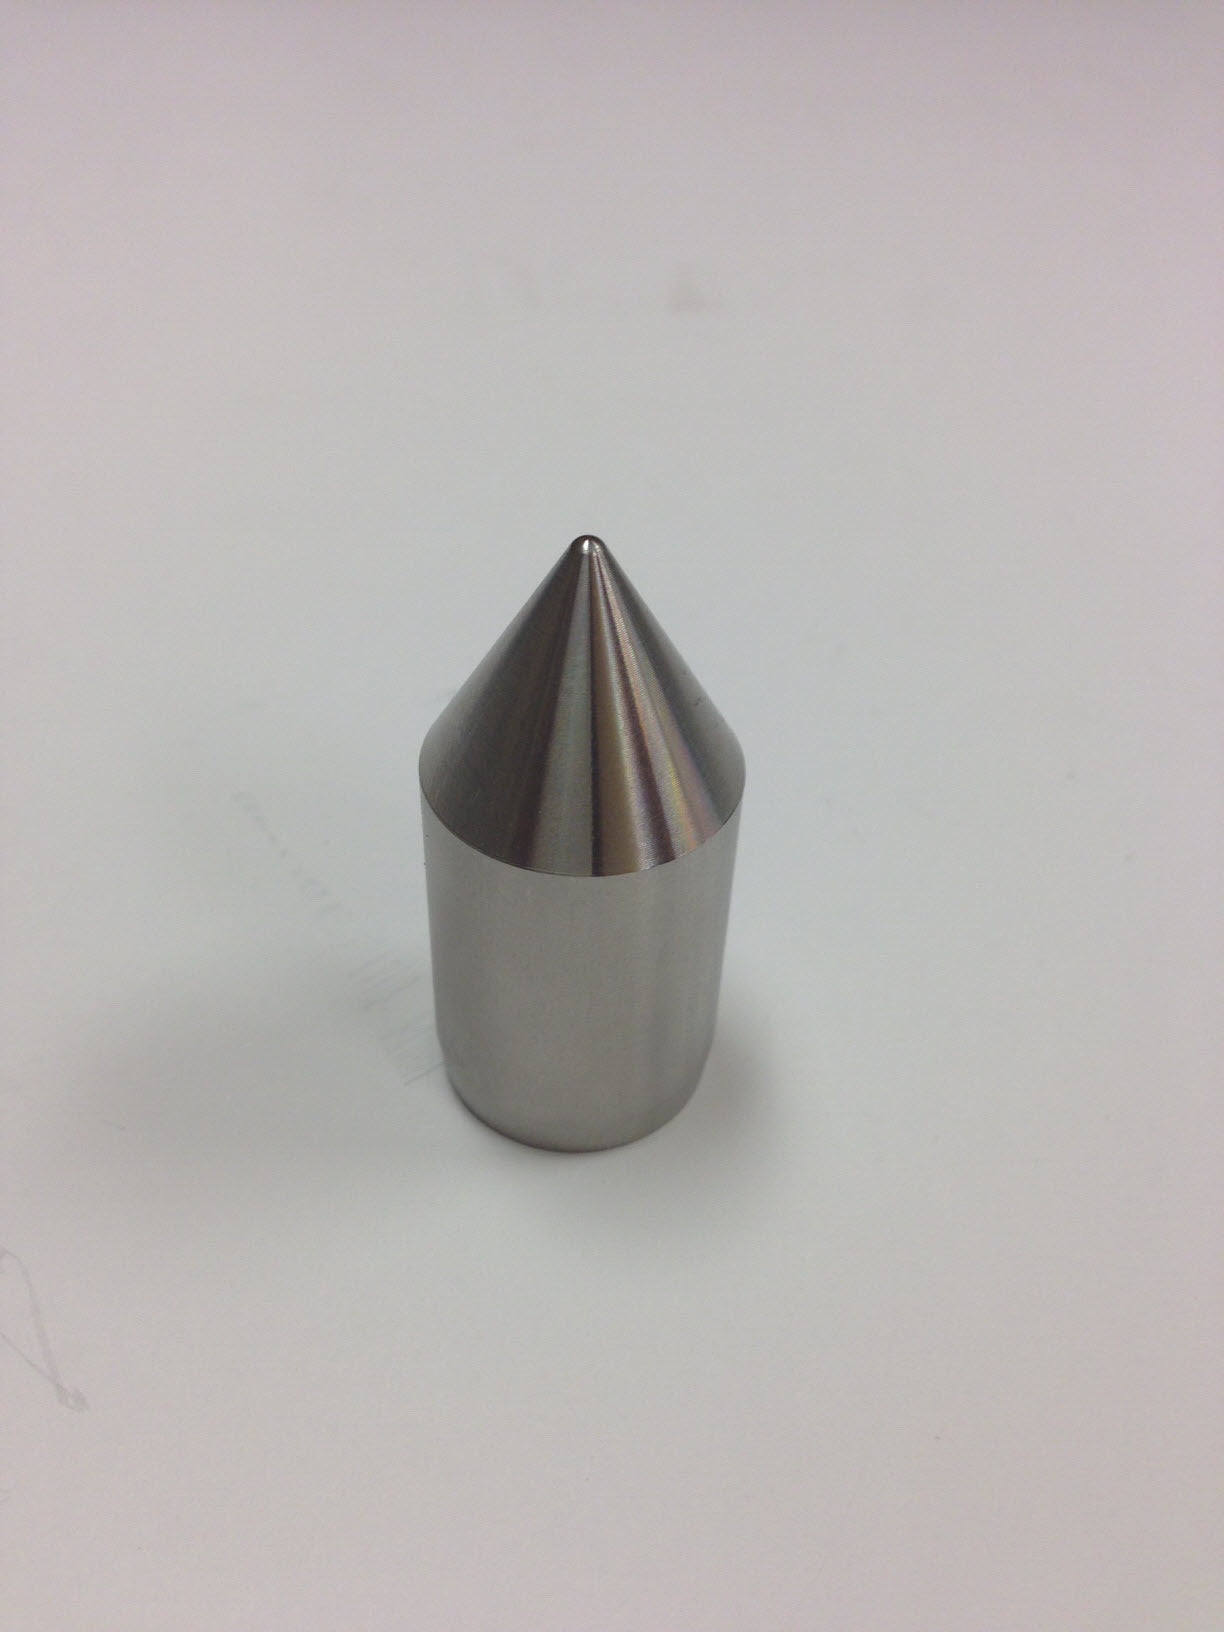 King Pin Stainless Steel Pole Tip - shop.cmpgroup.net